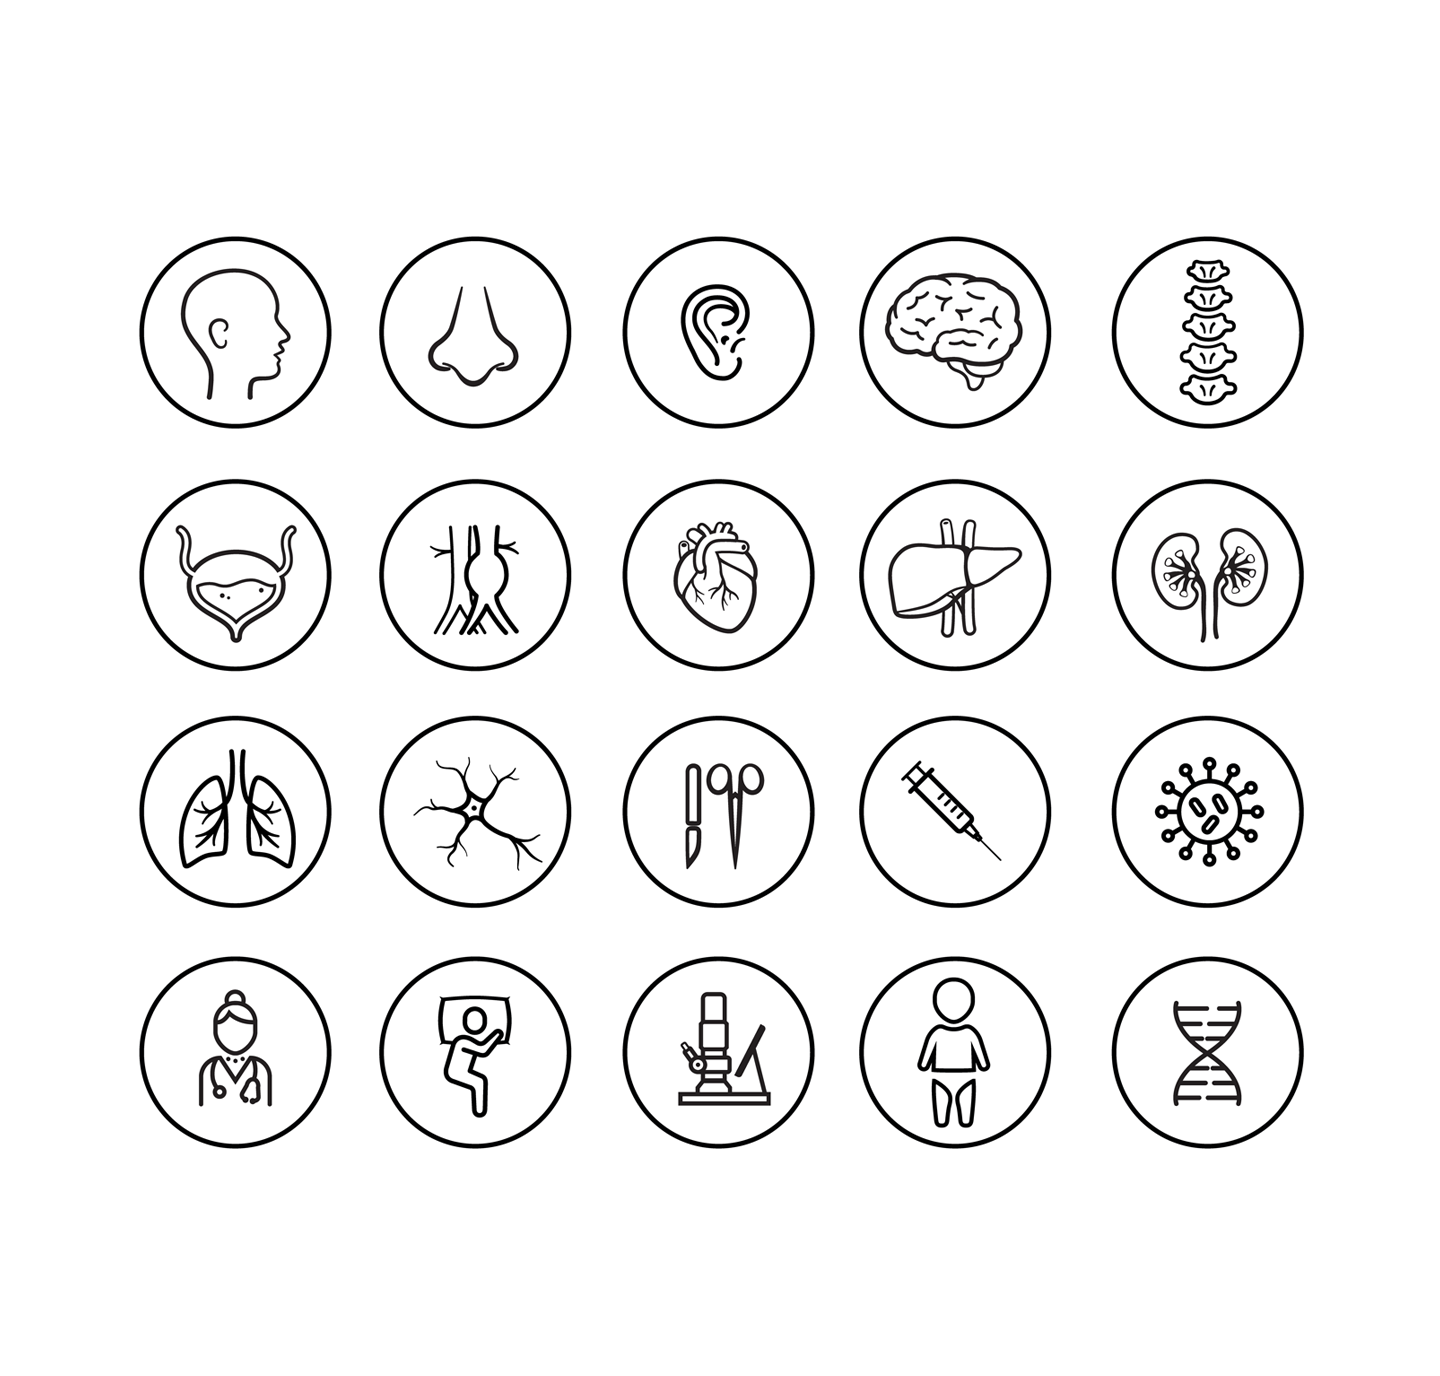 WashUMed_icons.png